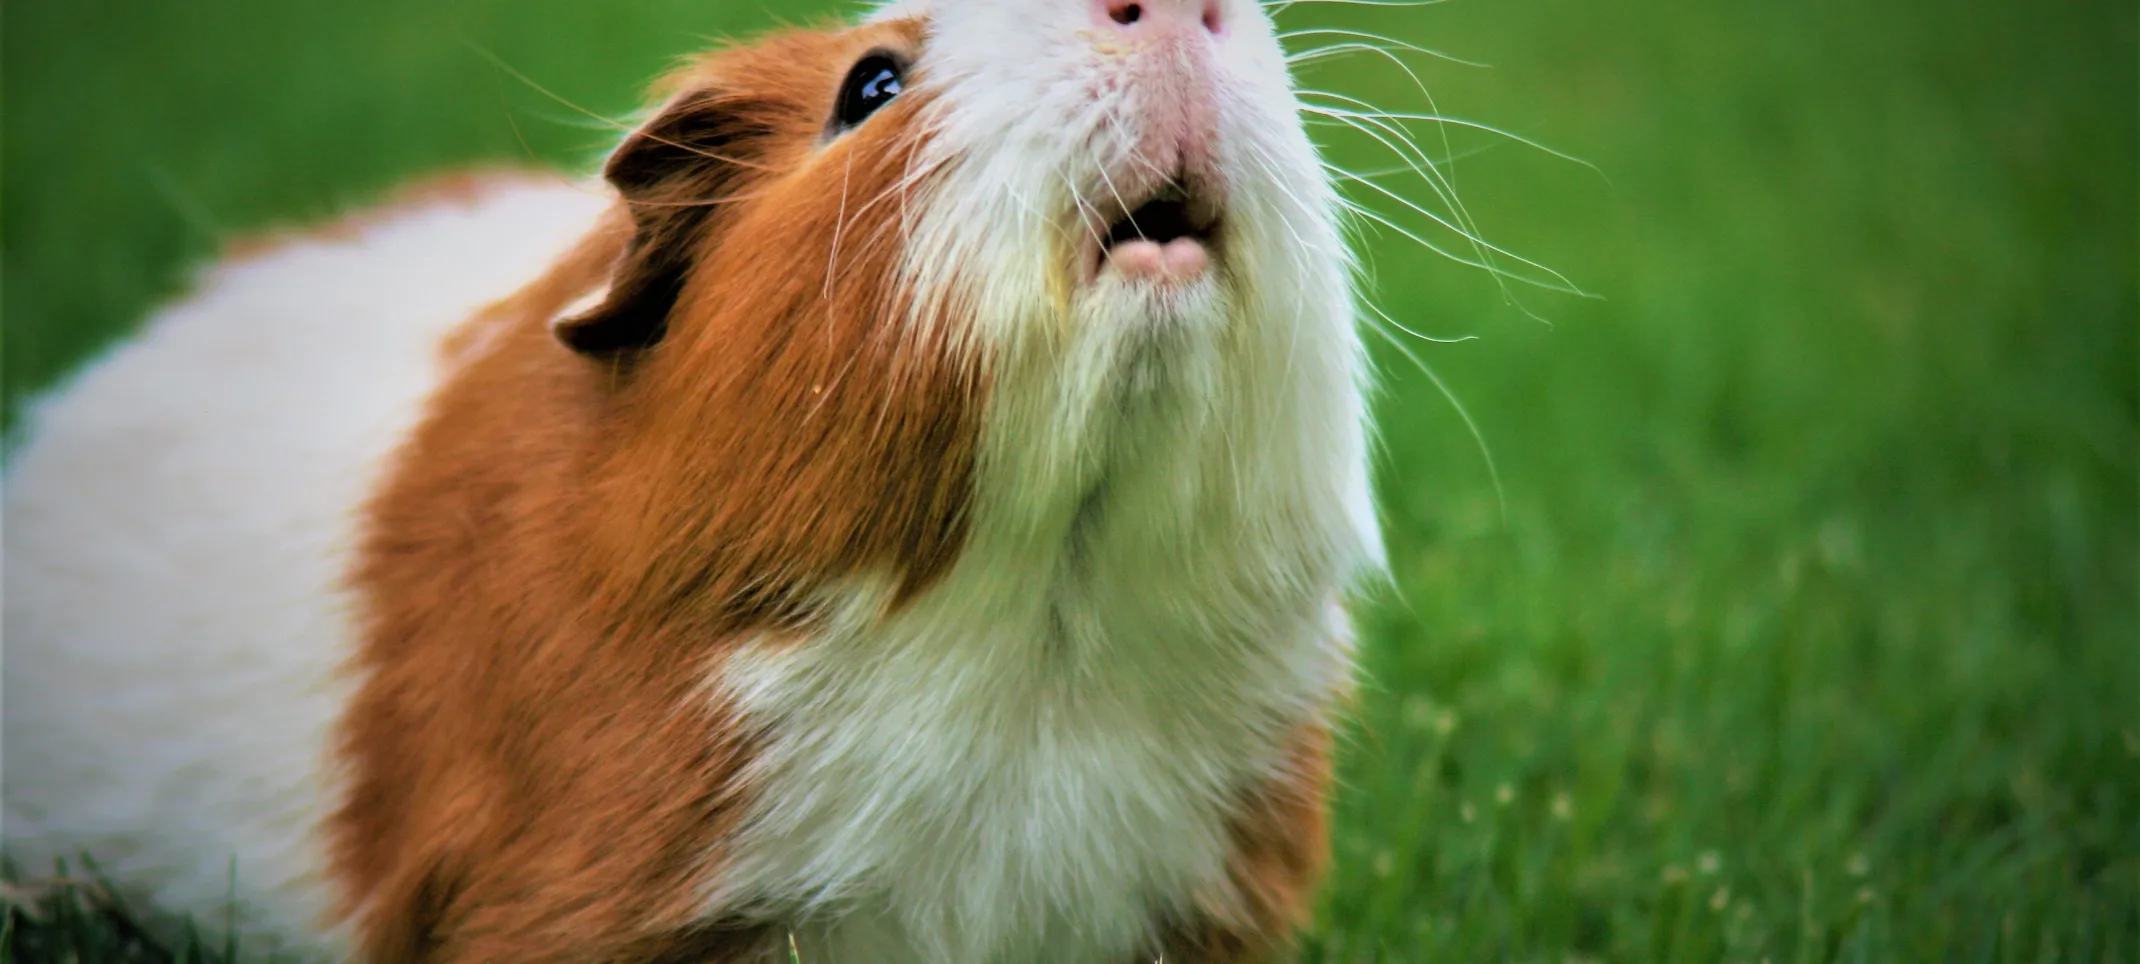 Guineapig sitting in the grass